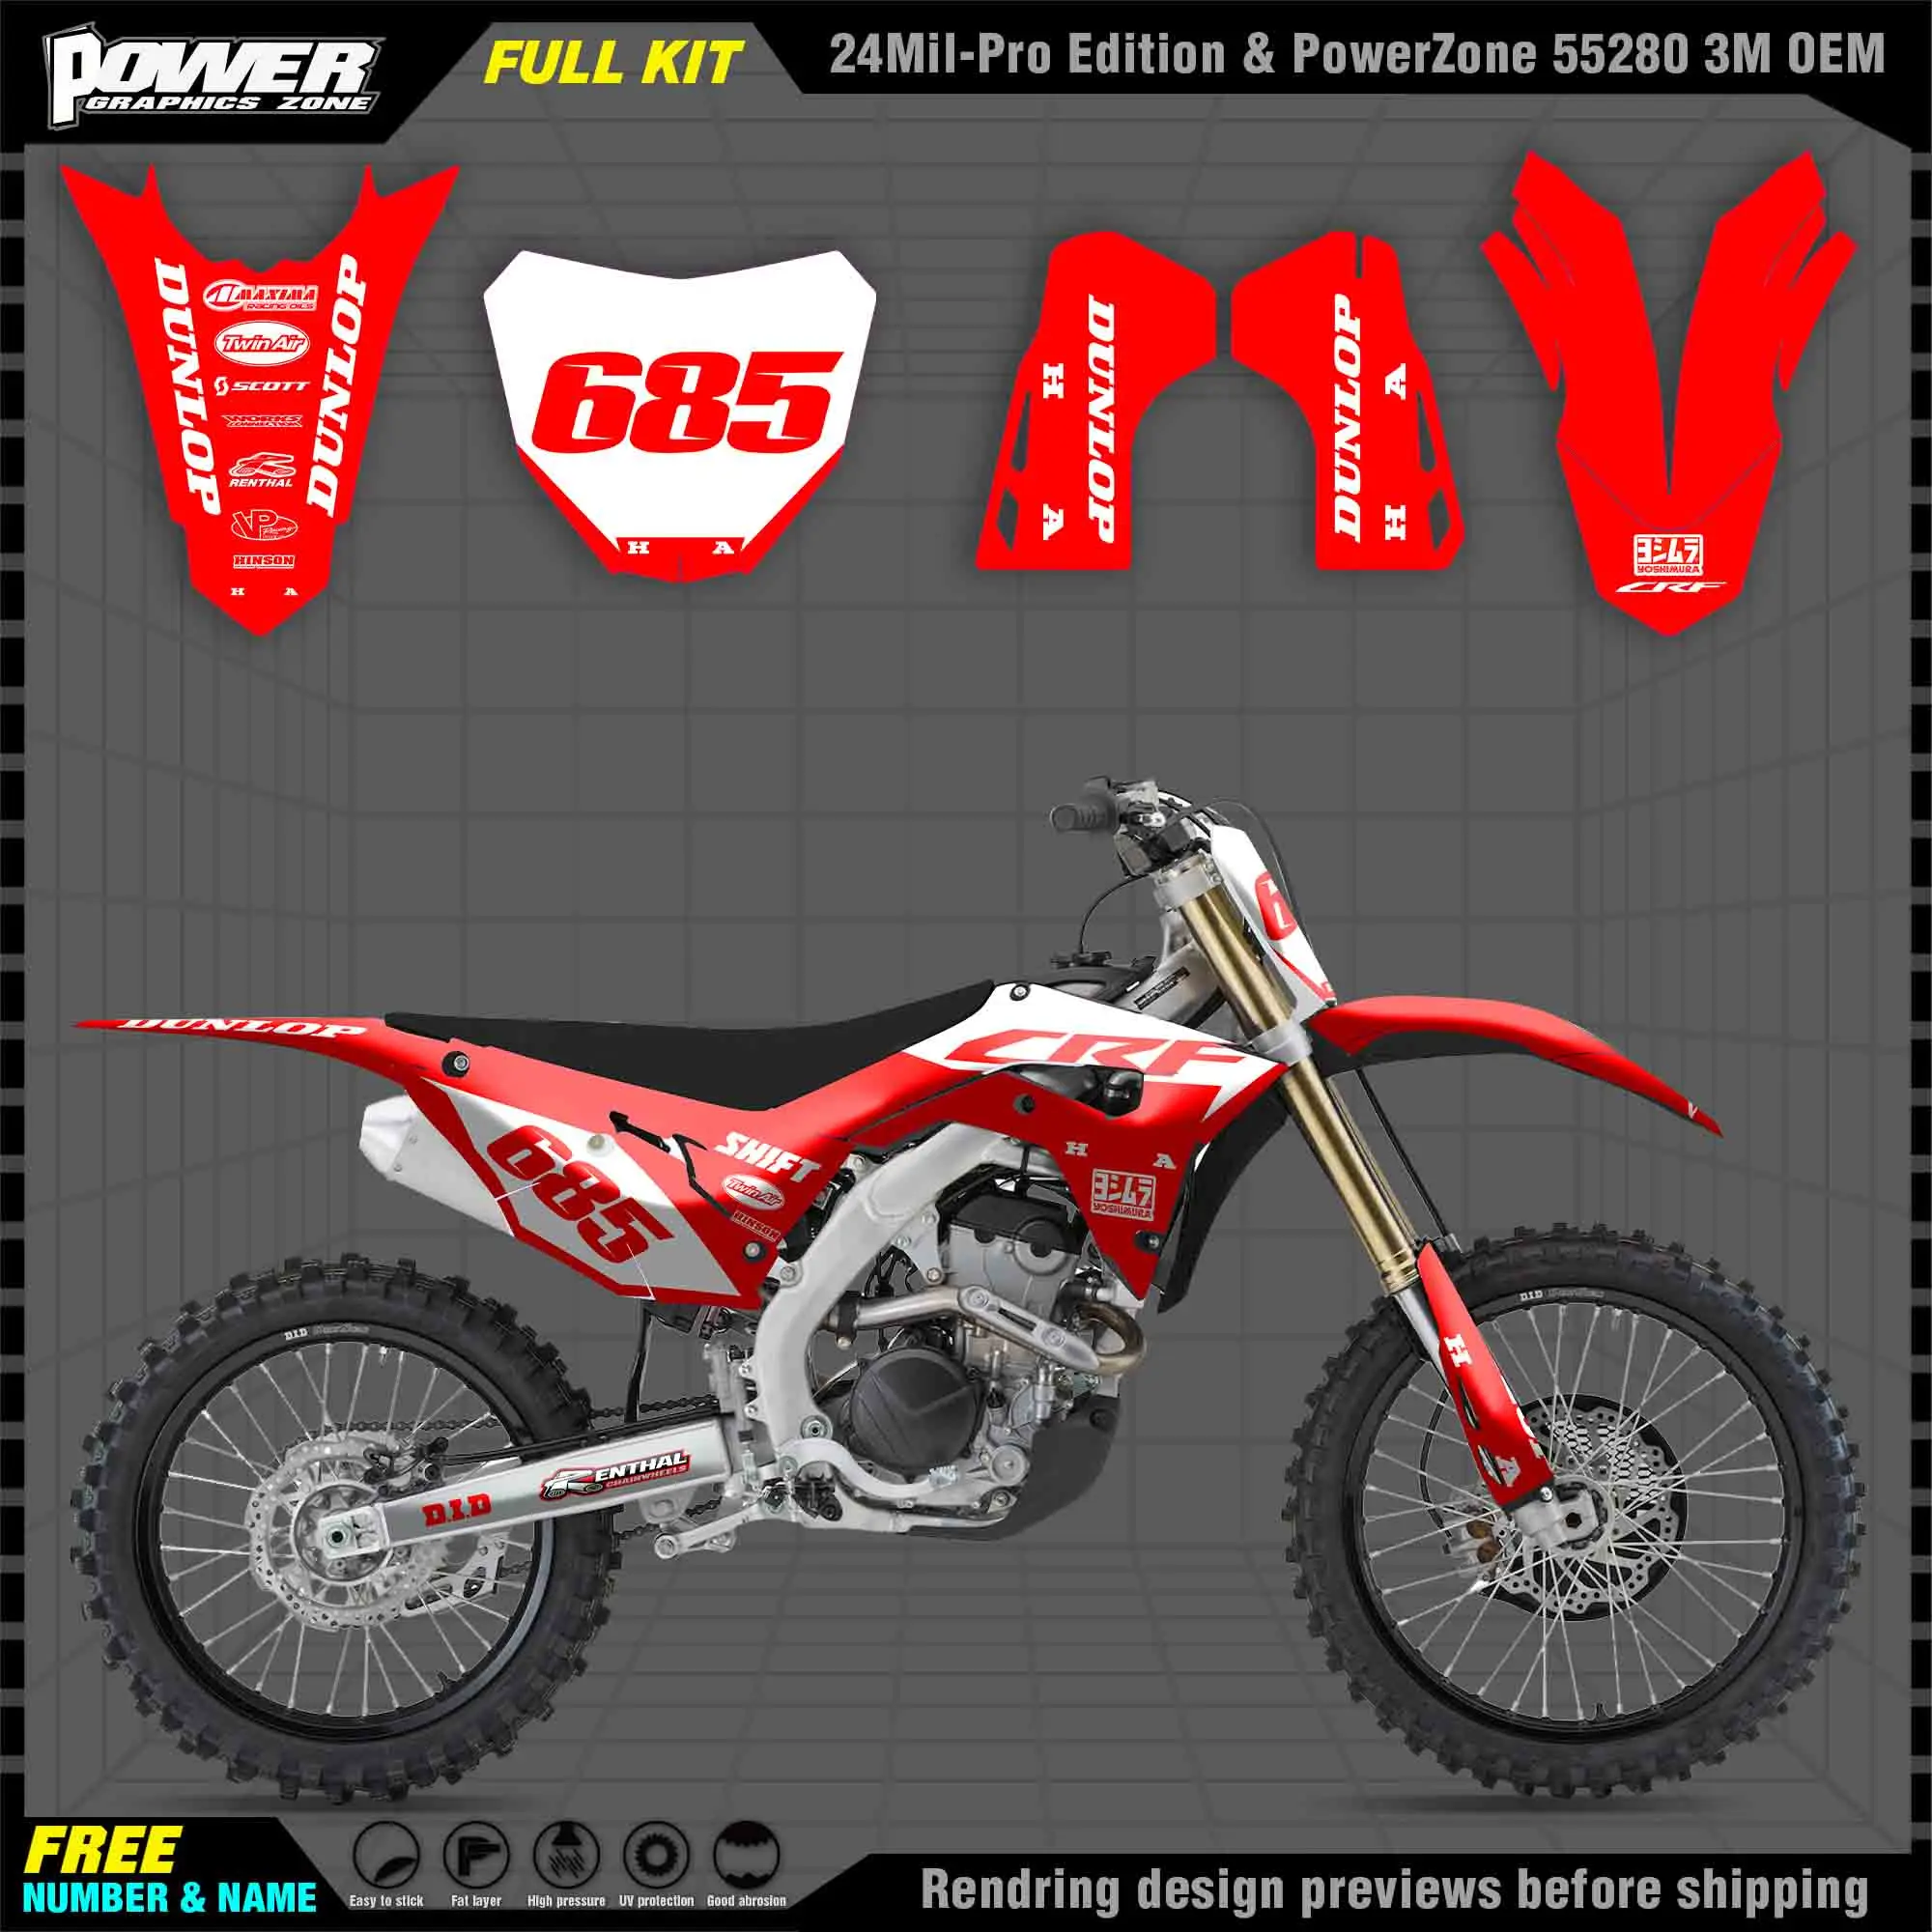 

PowerZone Custom Team Graphics Backgrounds Decals Stickers Kit For HONDA 2018 2019 2020 CRF250R 2017 2018 2019 2020 CRF450 007